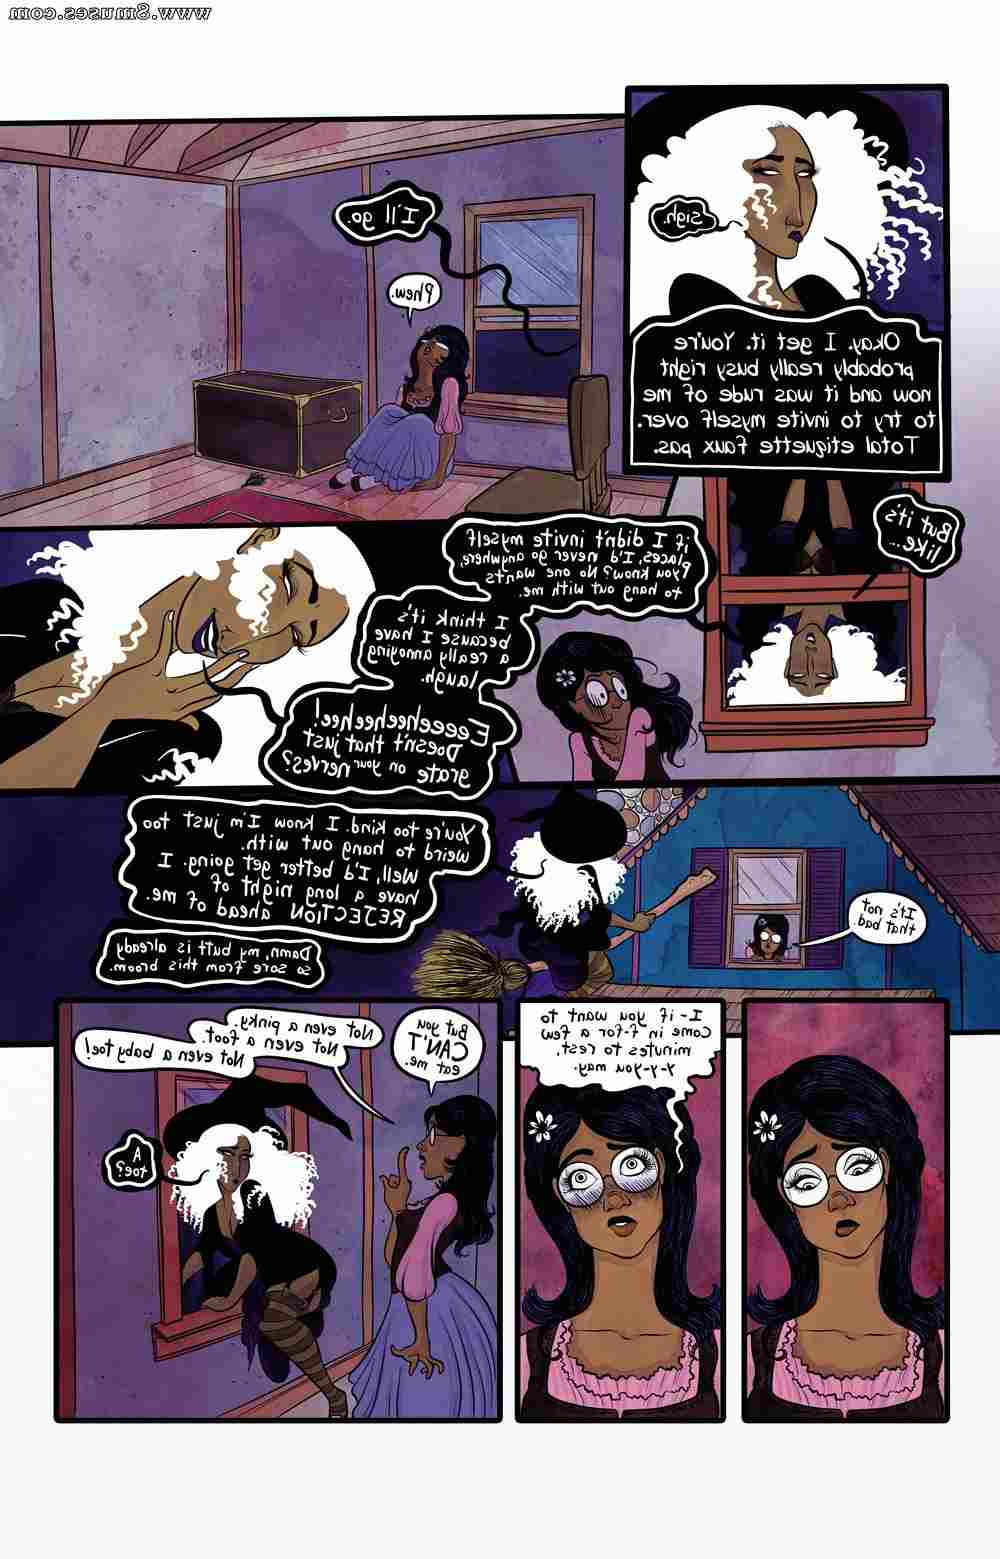 Filthy-Figments-Comics/The-Witch The_Witch__8muses_-_Sex_and_Porn_Comics_5.jpg